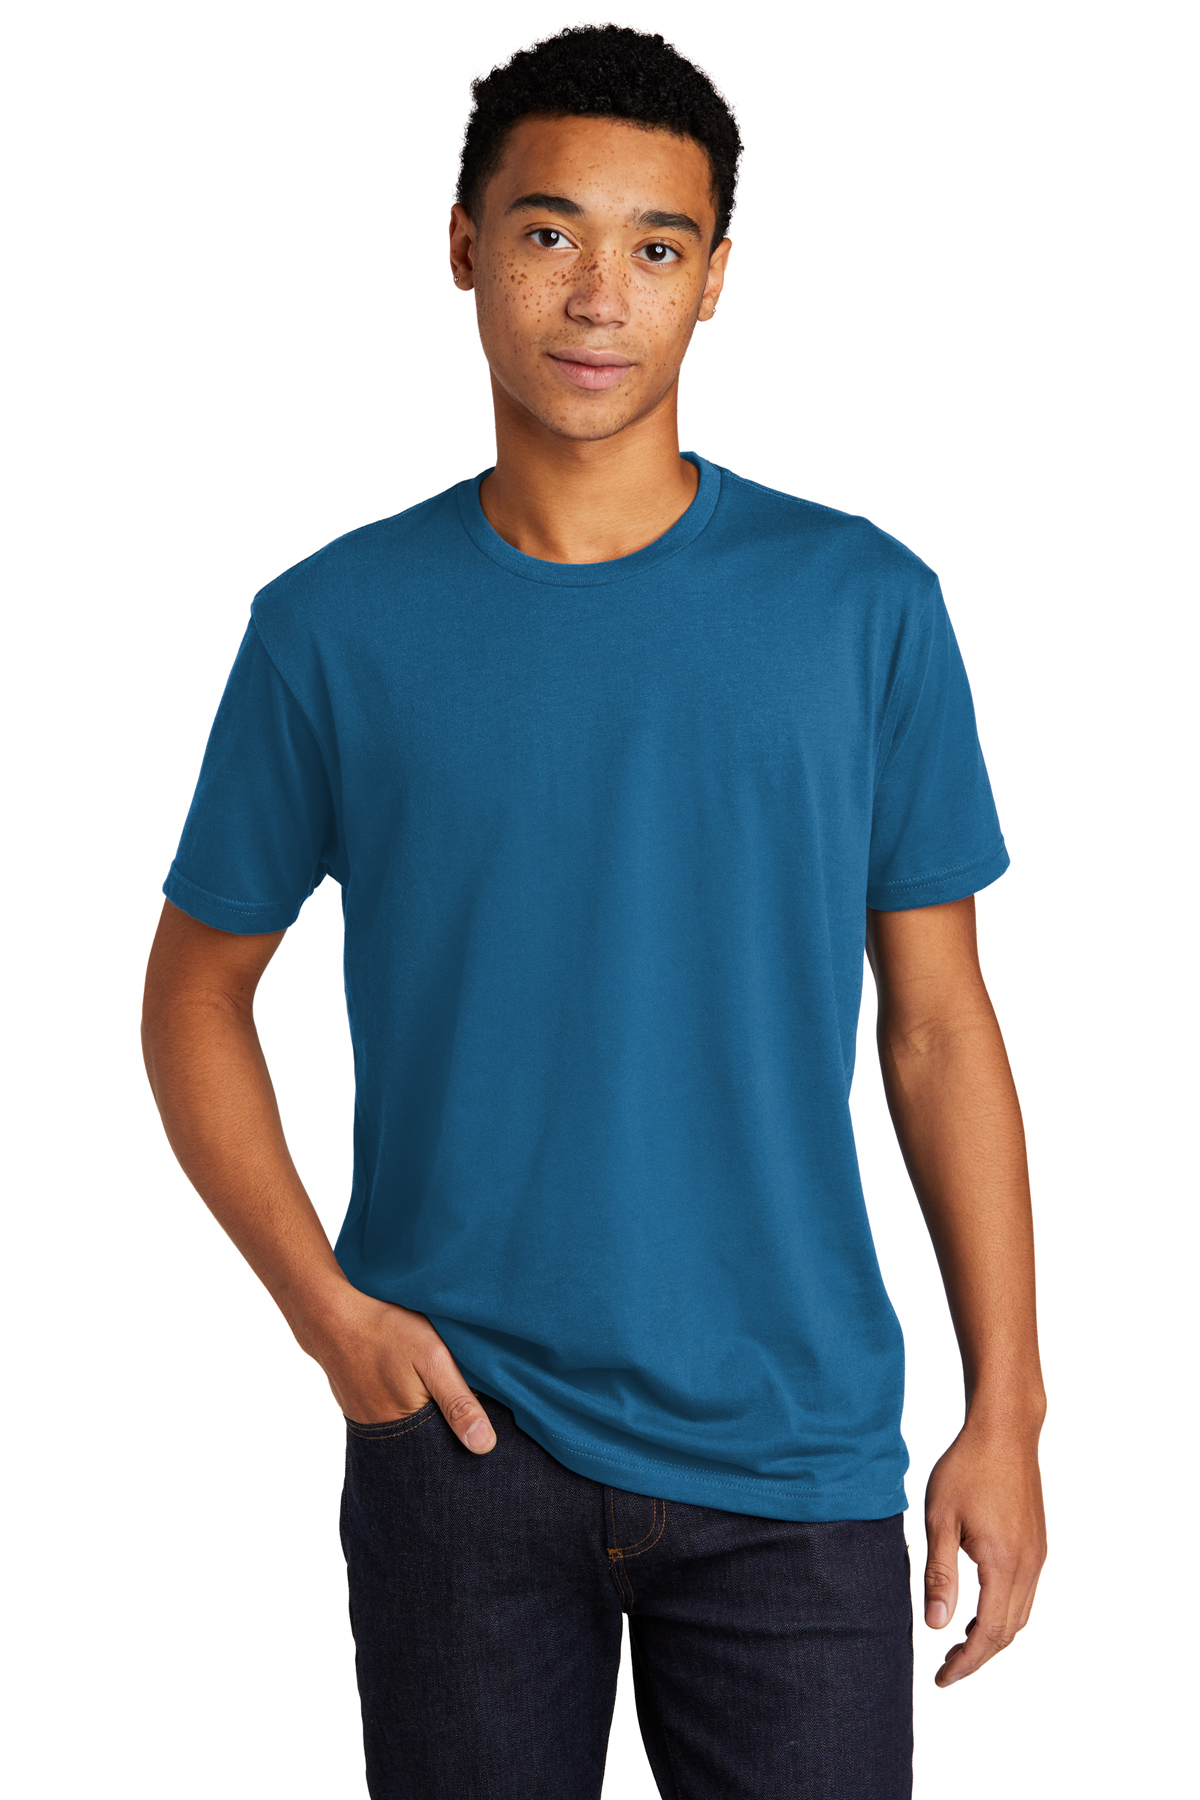 Next Level Apparel Unisex CVC Sueded Tee, Product